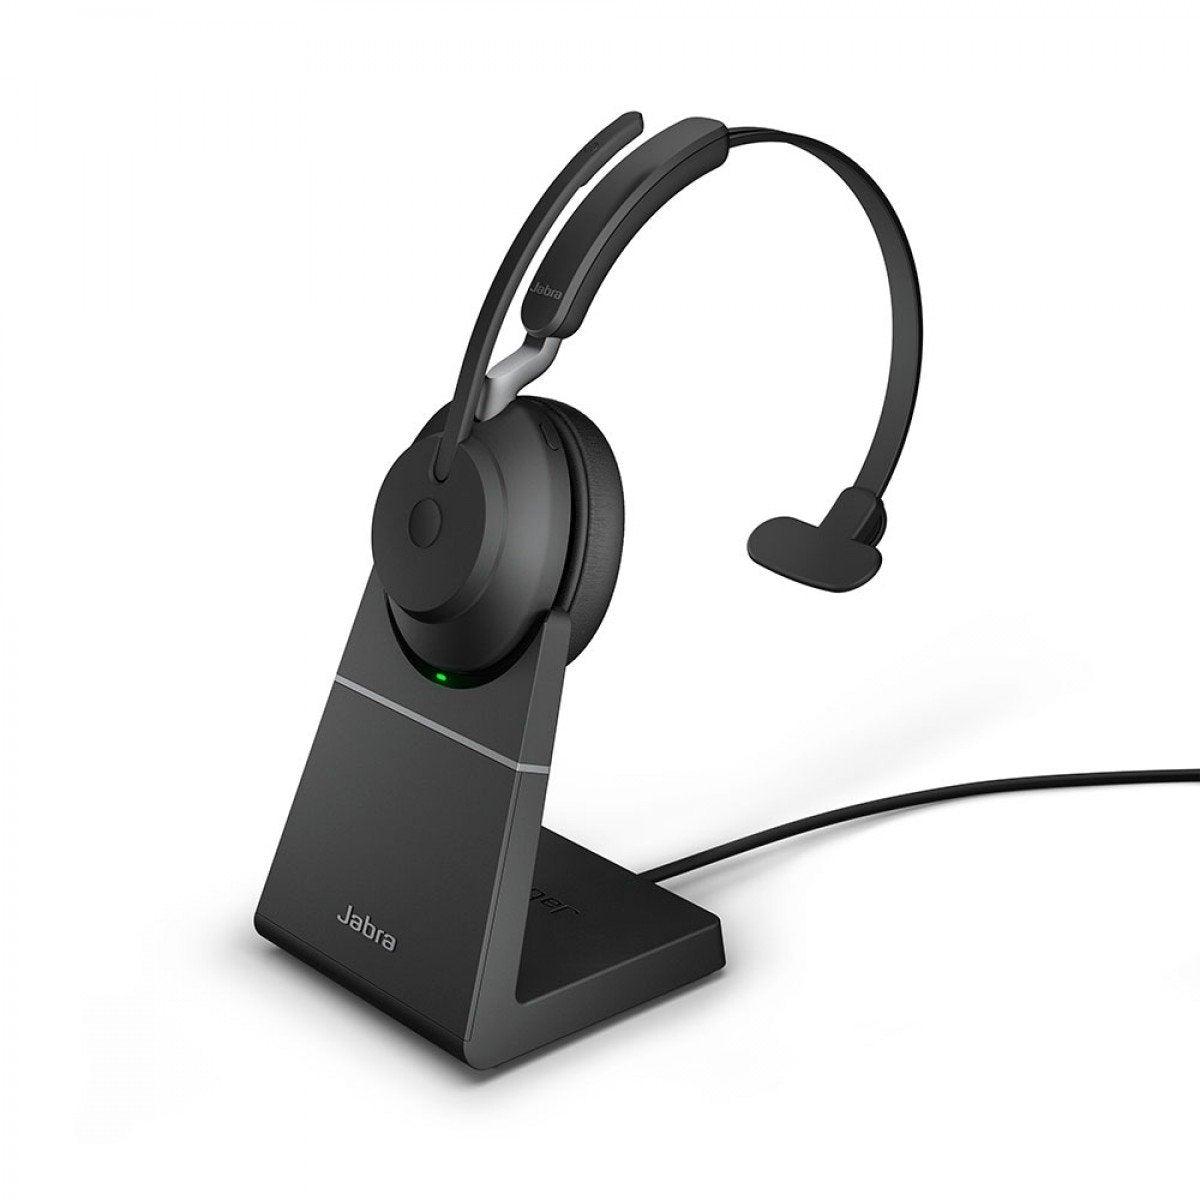 Yealink SIP T58A Evolve2 65 Advanced Bluetooth Headset - Headsets4business